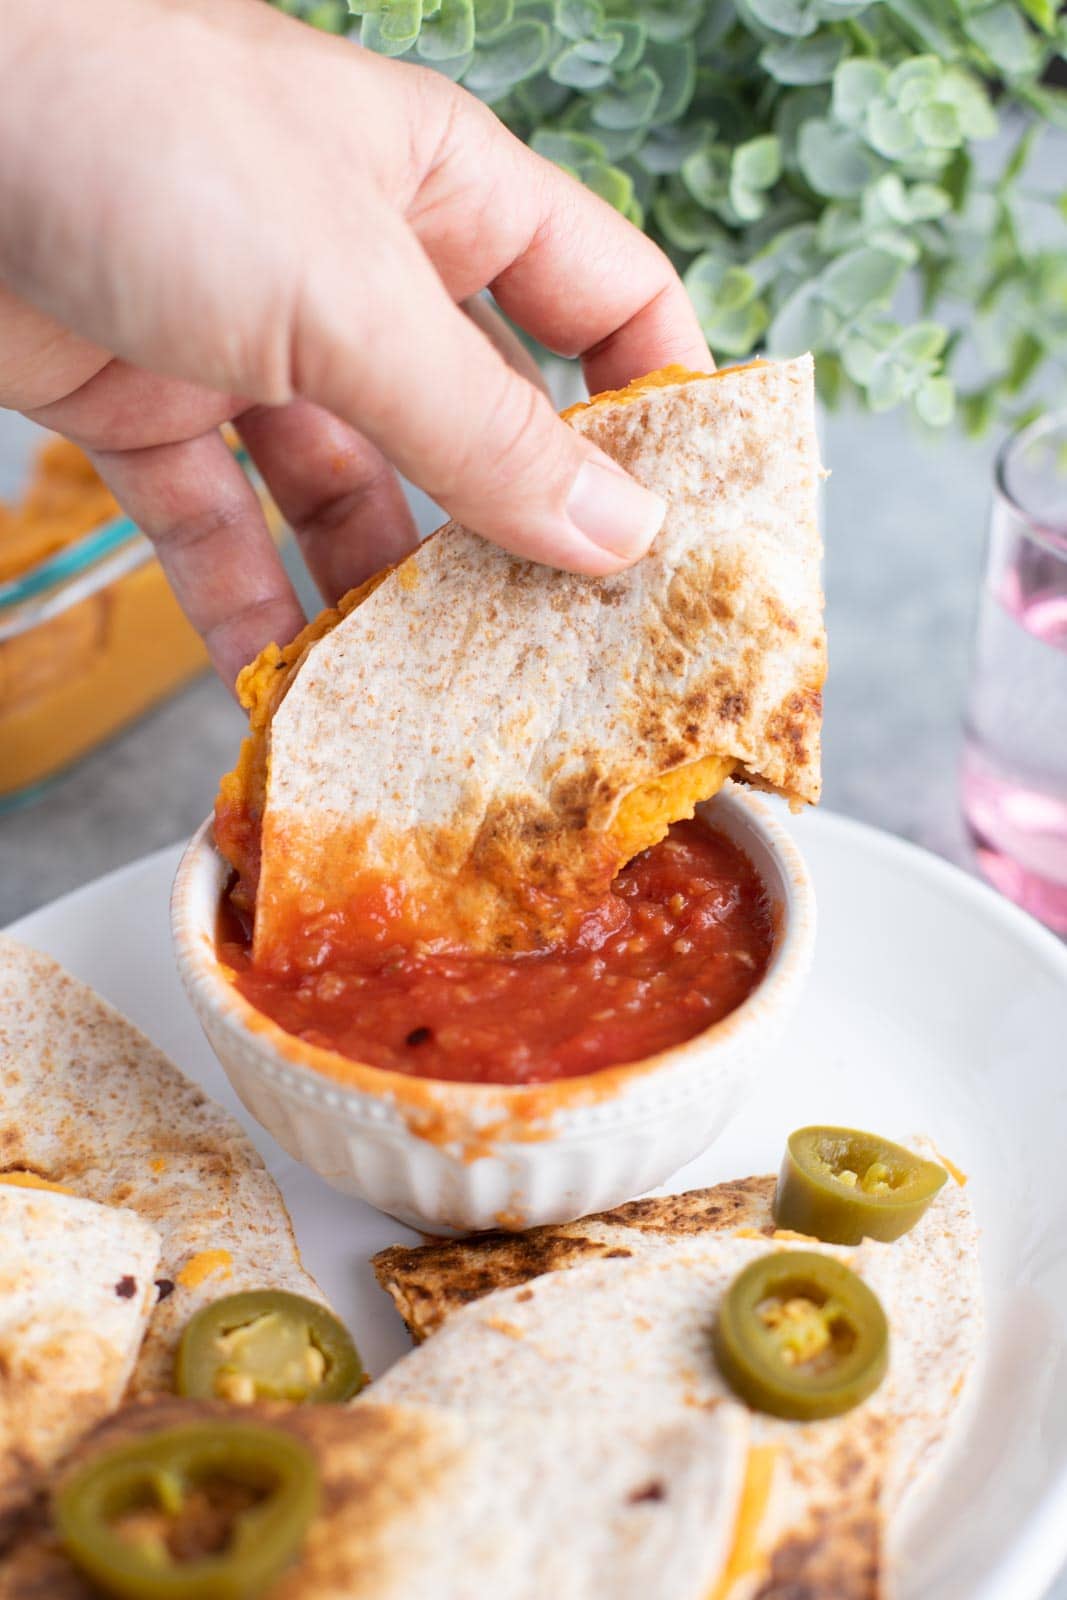 A hand dipping a quesadilla into a bowl of salsa on a white plate.